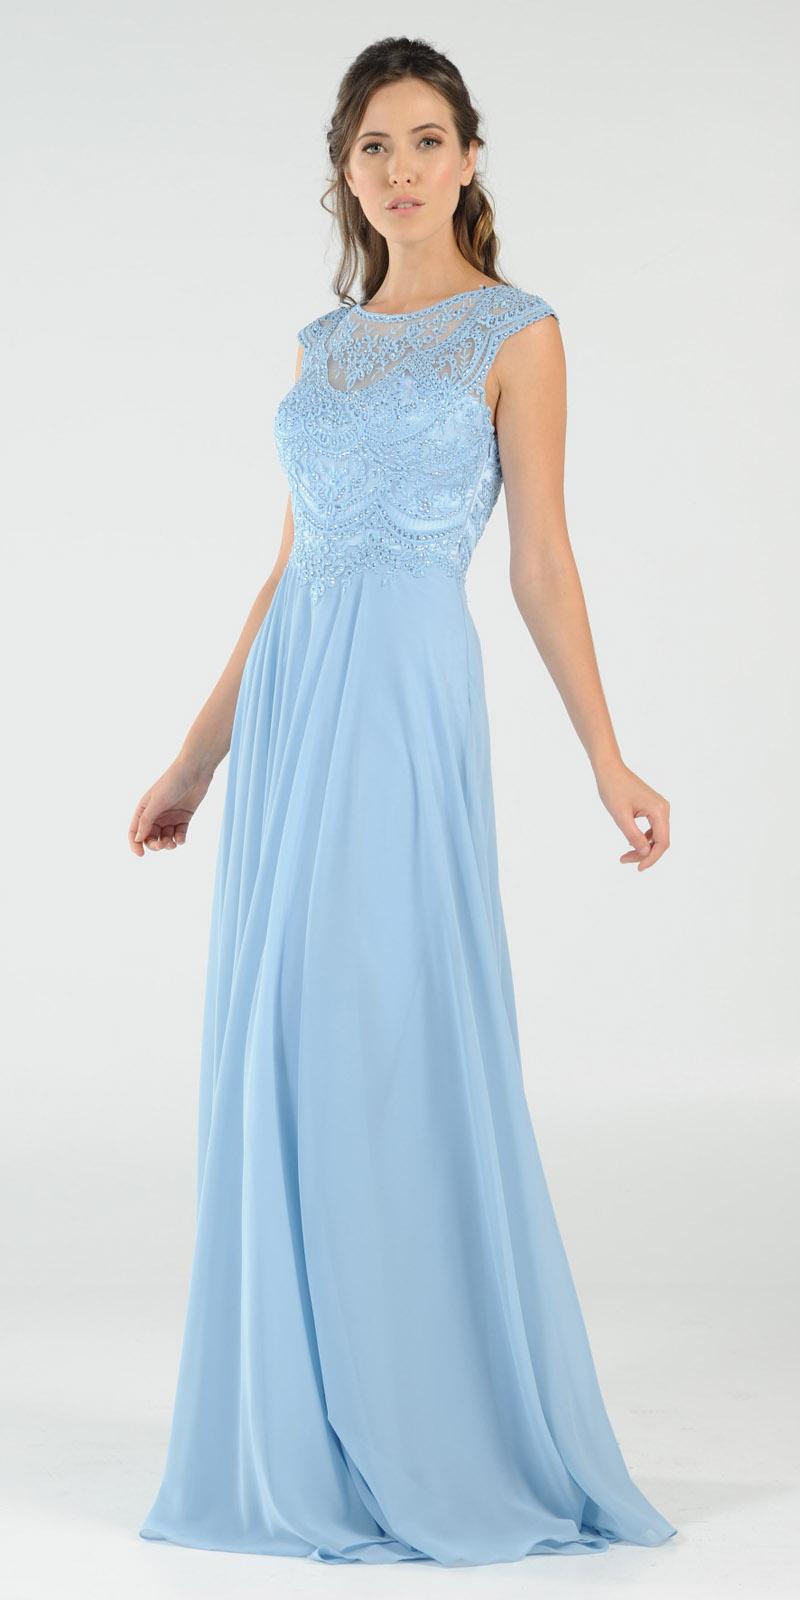 Ice Blue Cap Sleeves Embroidered Long Formal Dress with Slit